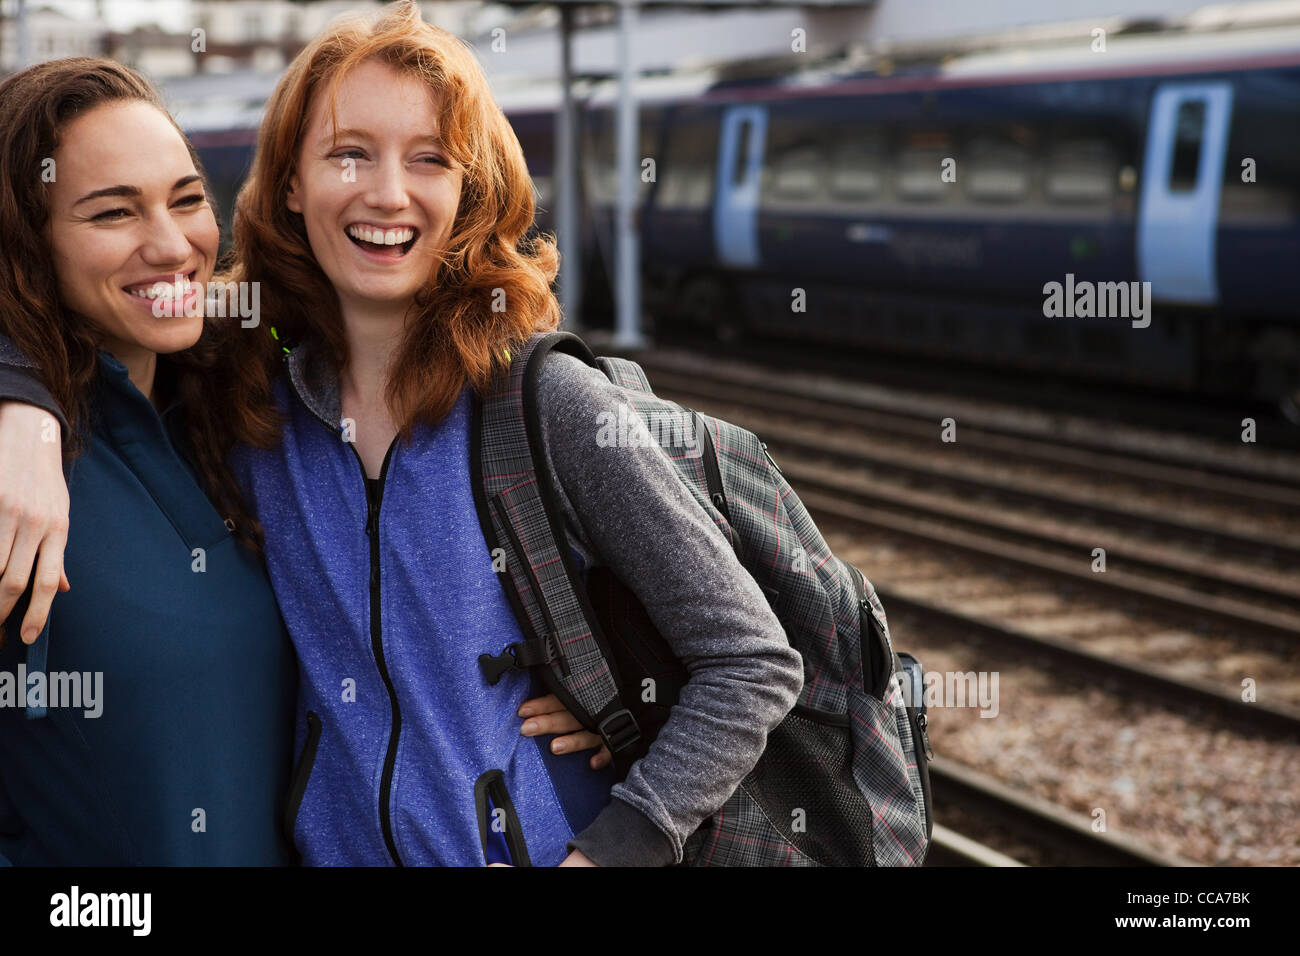 Young women smiling at train station Banque D'Images